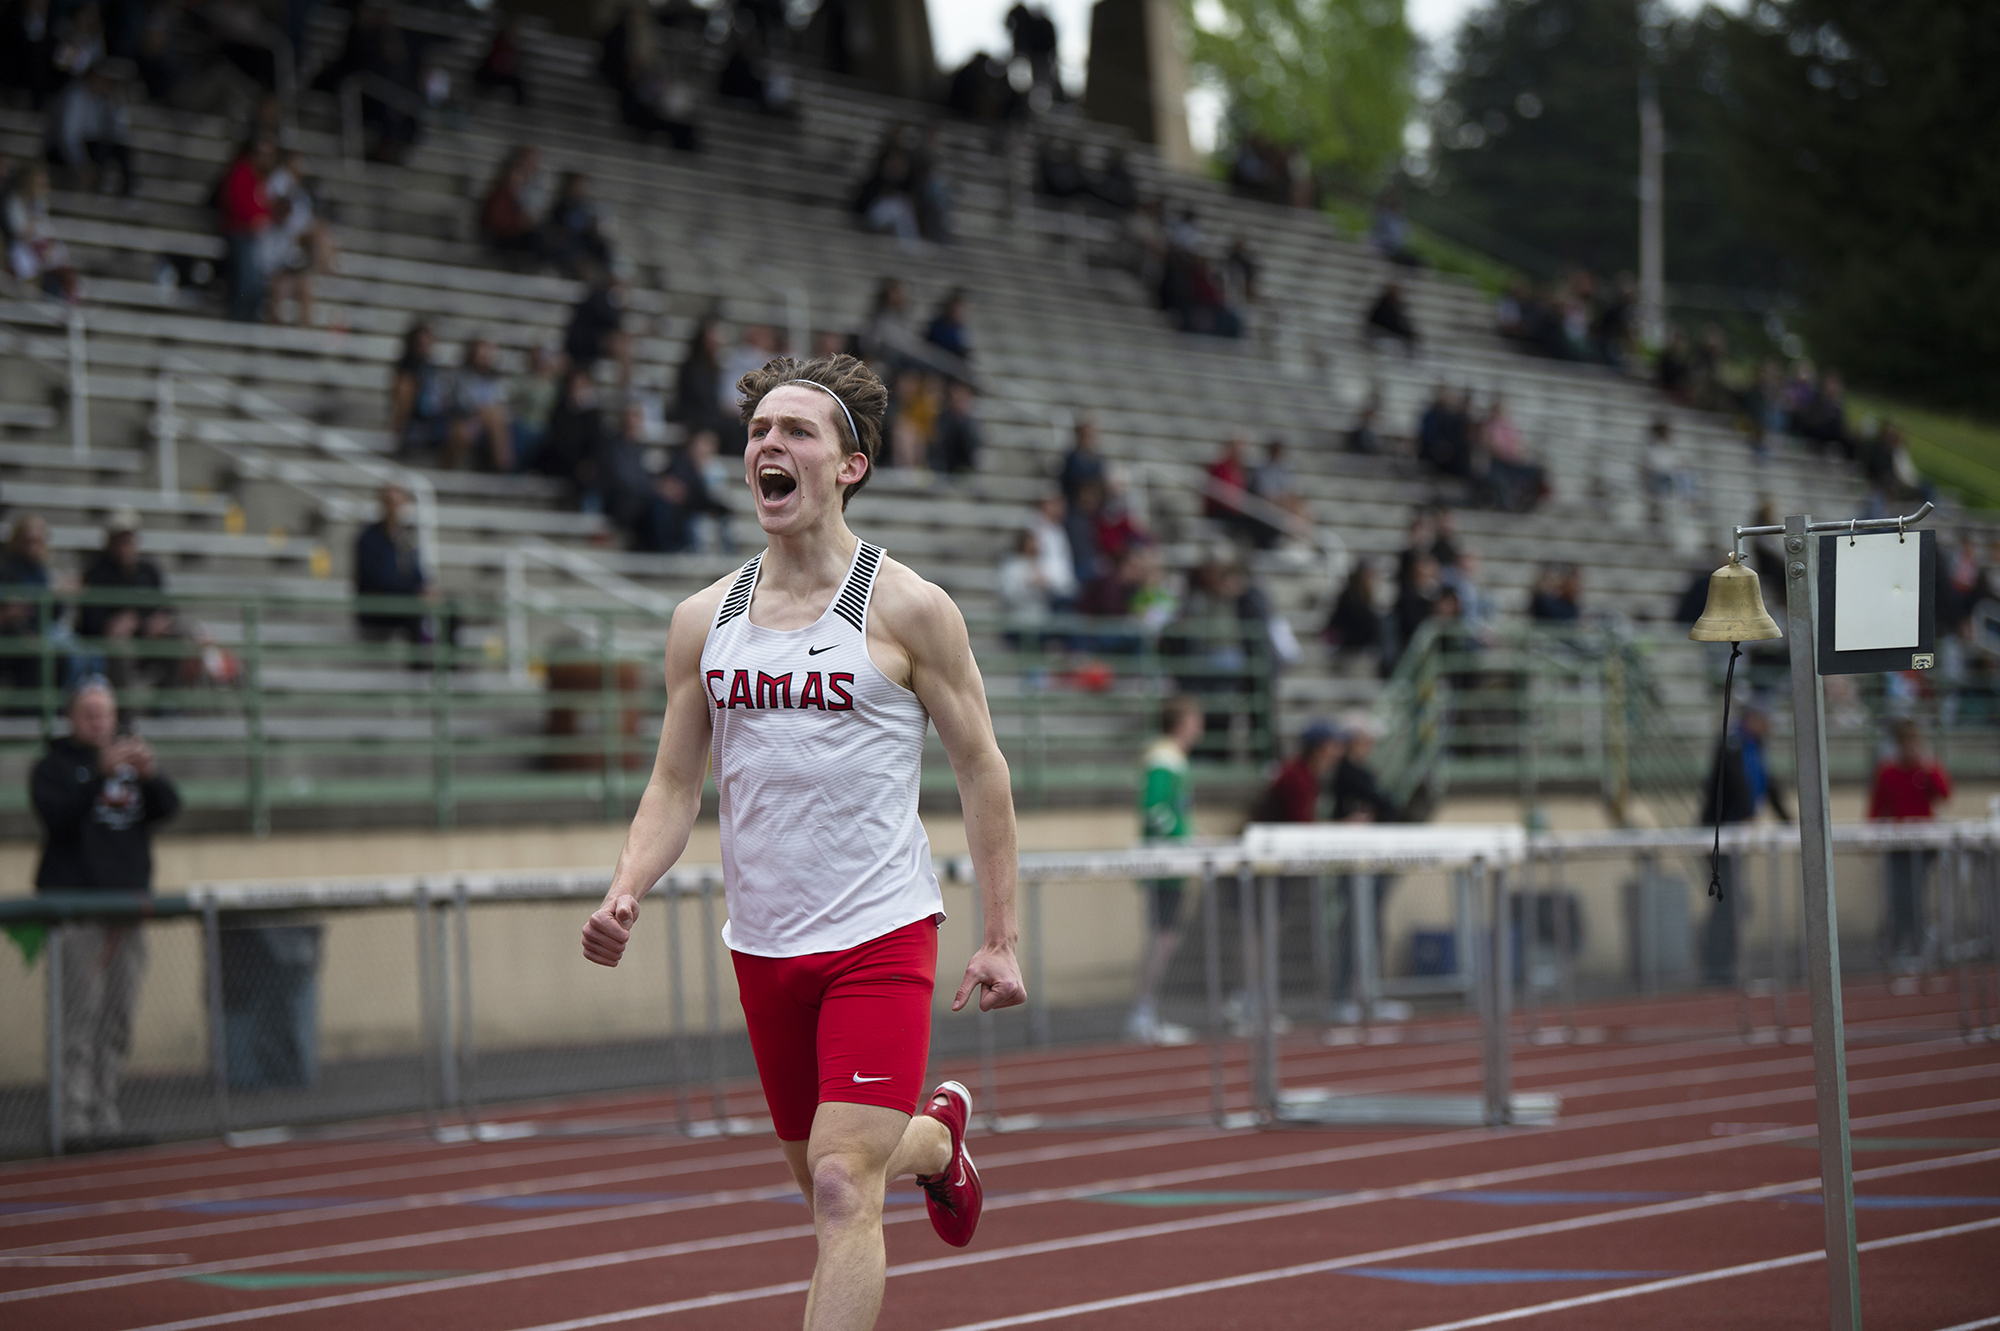 Camas' James Puffer shouts as he crosses the finish line to win the 4A boys 1,600 meters at the 4A and 3A district track and field meet at McKenzie Stadium on Wednesday, May 11, 2022.